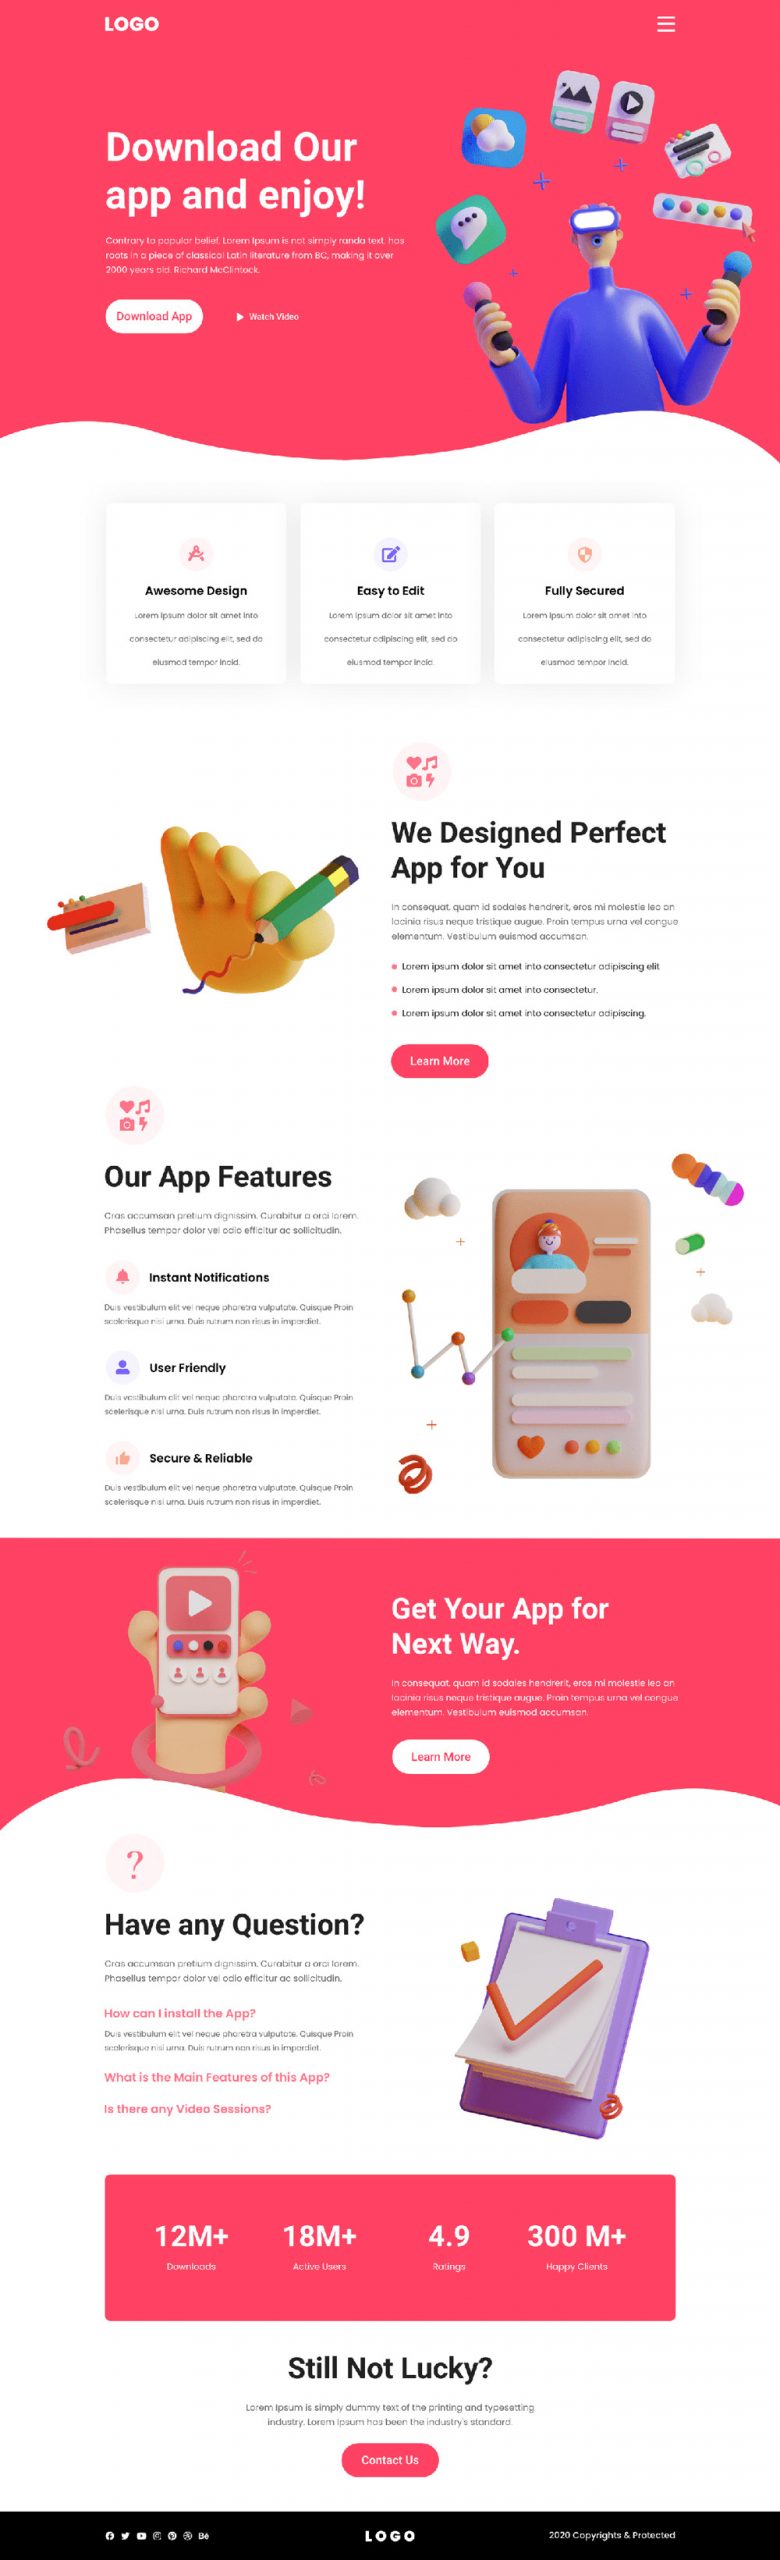 Free Mobile App Landing Page Web XD Template